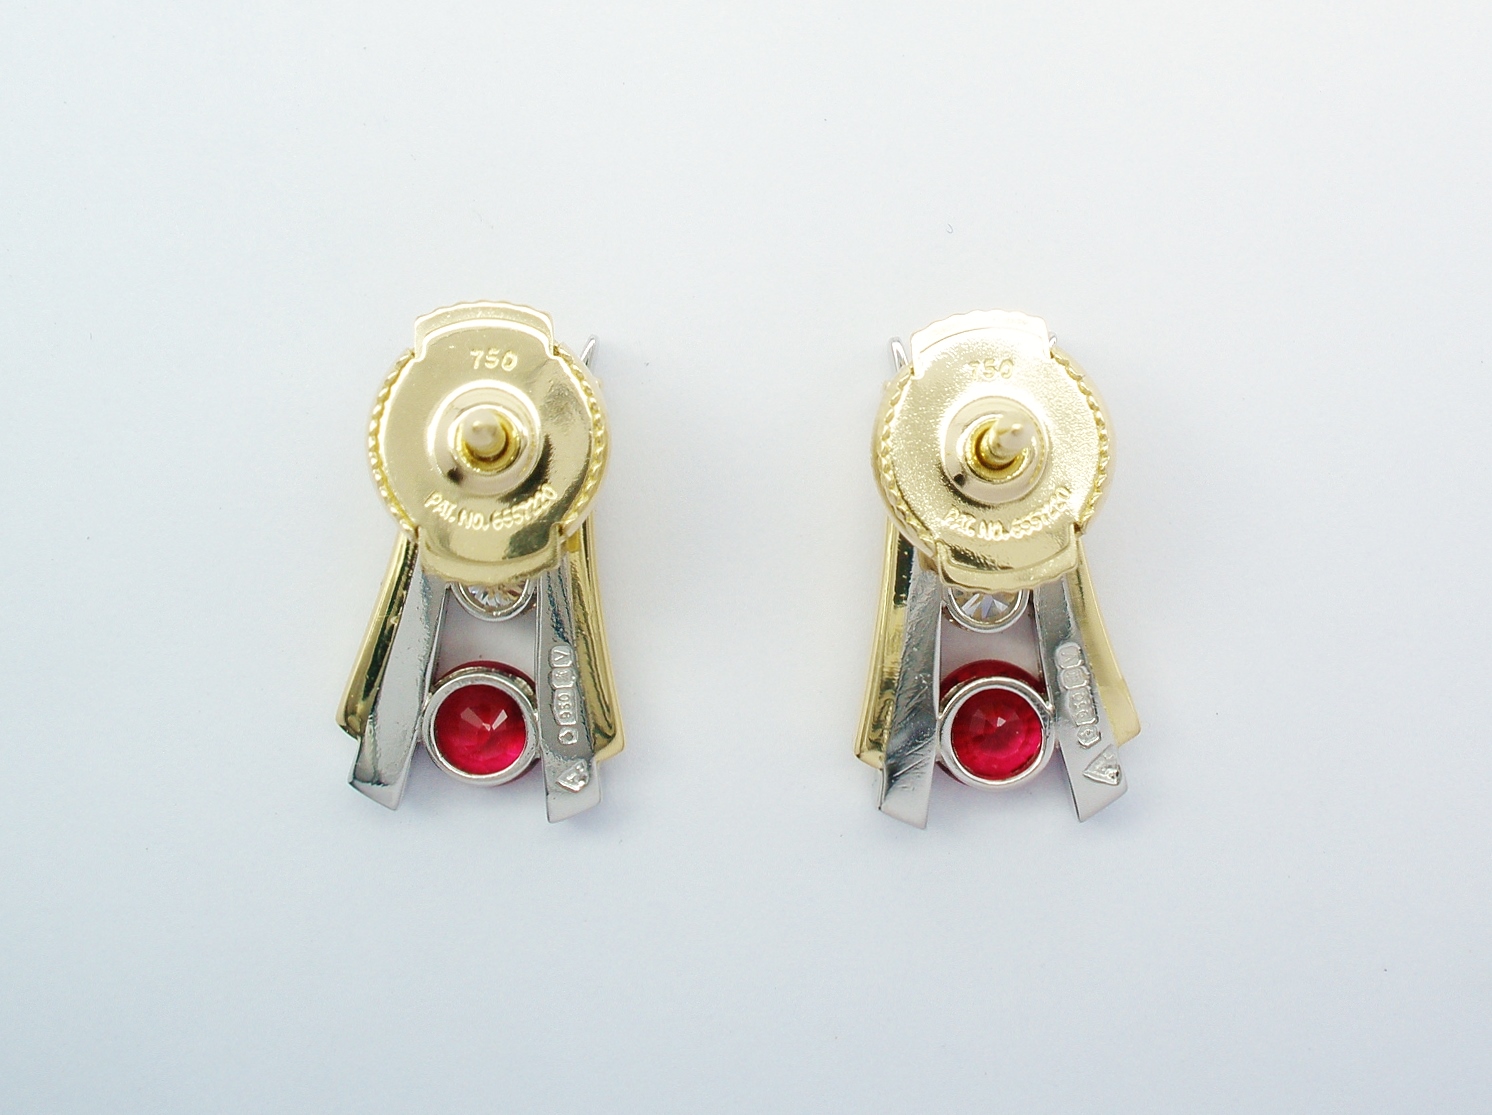 A pair of 3 stone round ruby and round brilliant cut diamond ear studs channel set in platinum, trimmed with 18ct. yellow gold and with 18ct. yellow gold 'guardian' safety fittings.